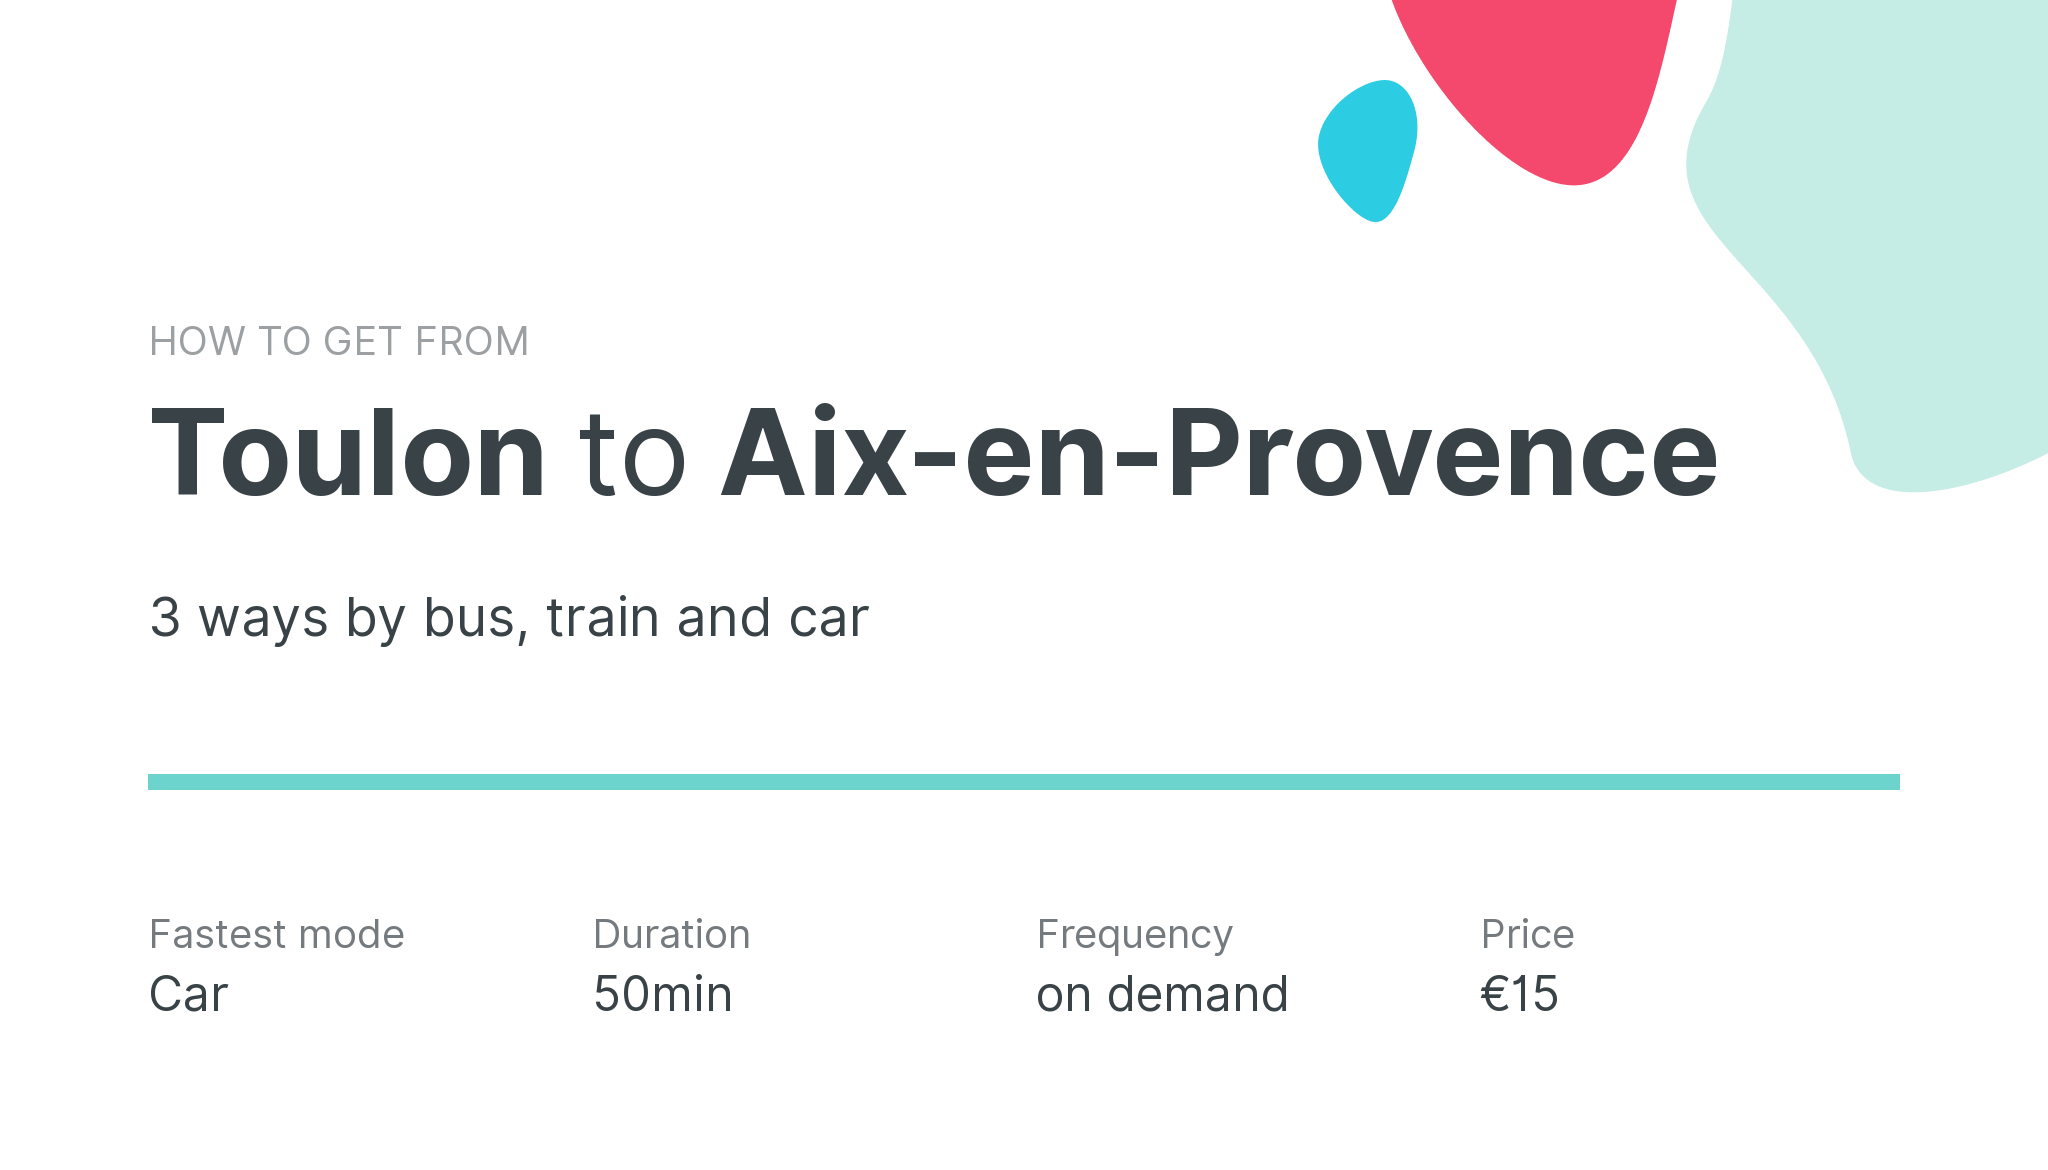 How do I get from Toulon to Aix-en-Provence